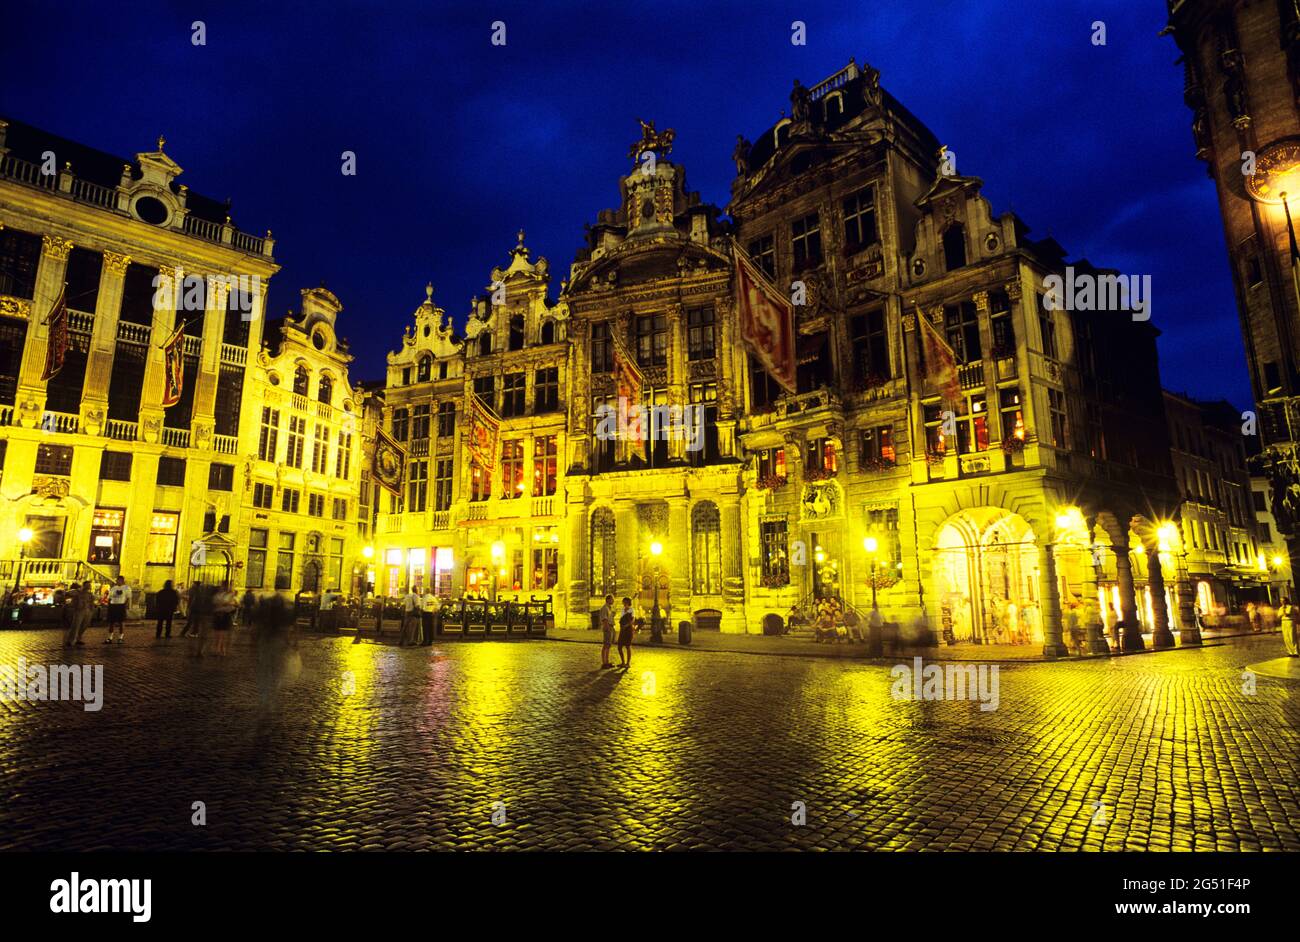 Guildhalls surrounding the Grand Place at night, Brussels, Belgium Stock Photo